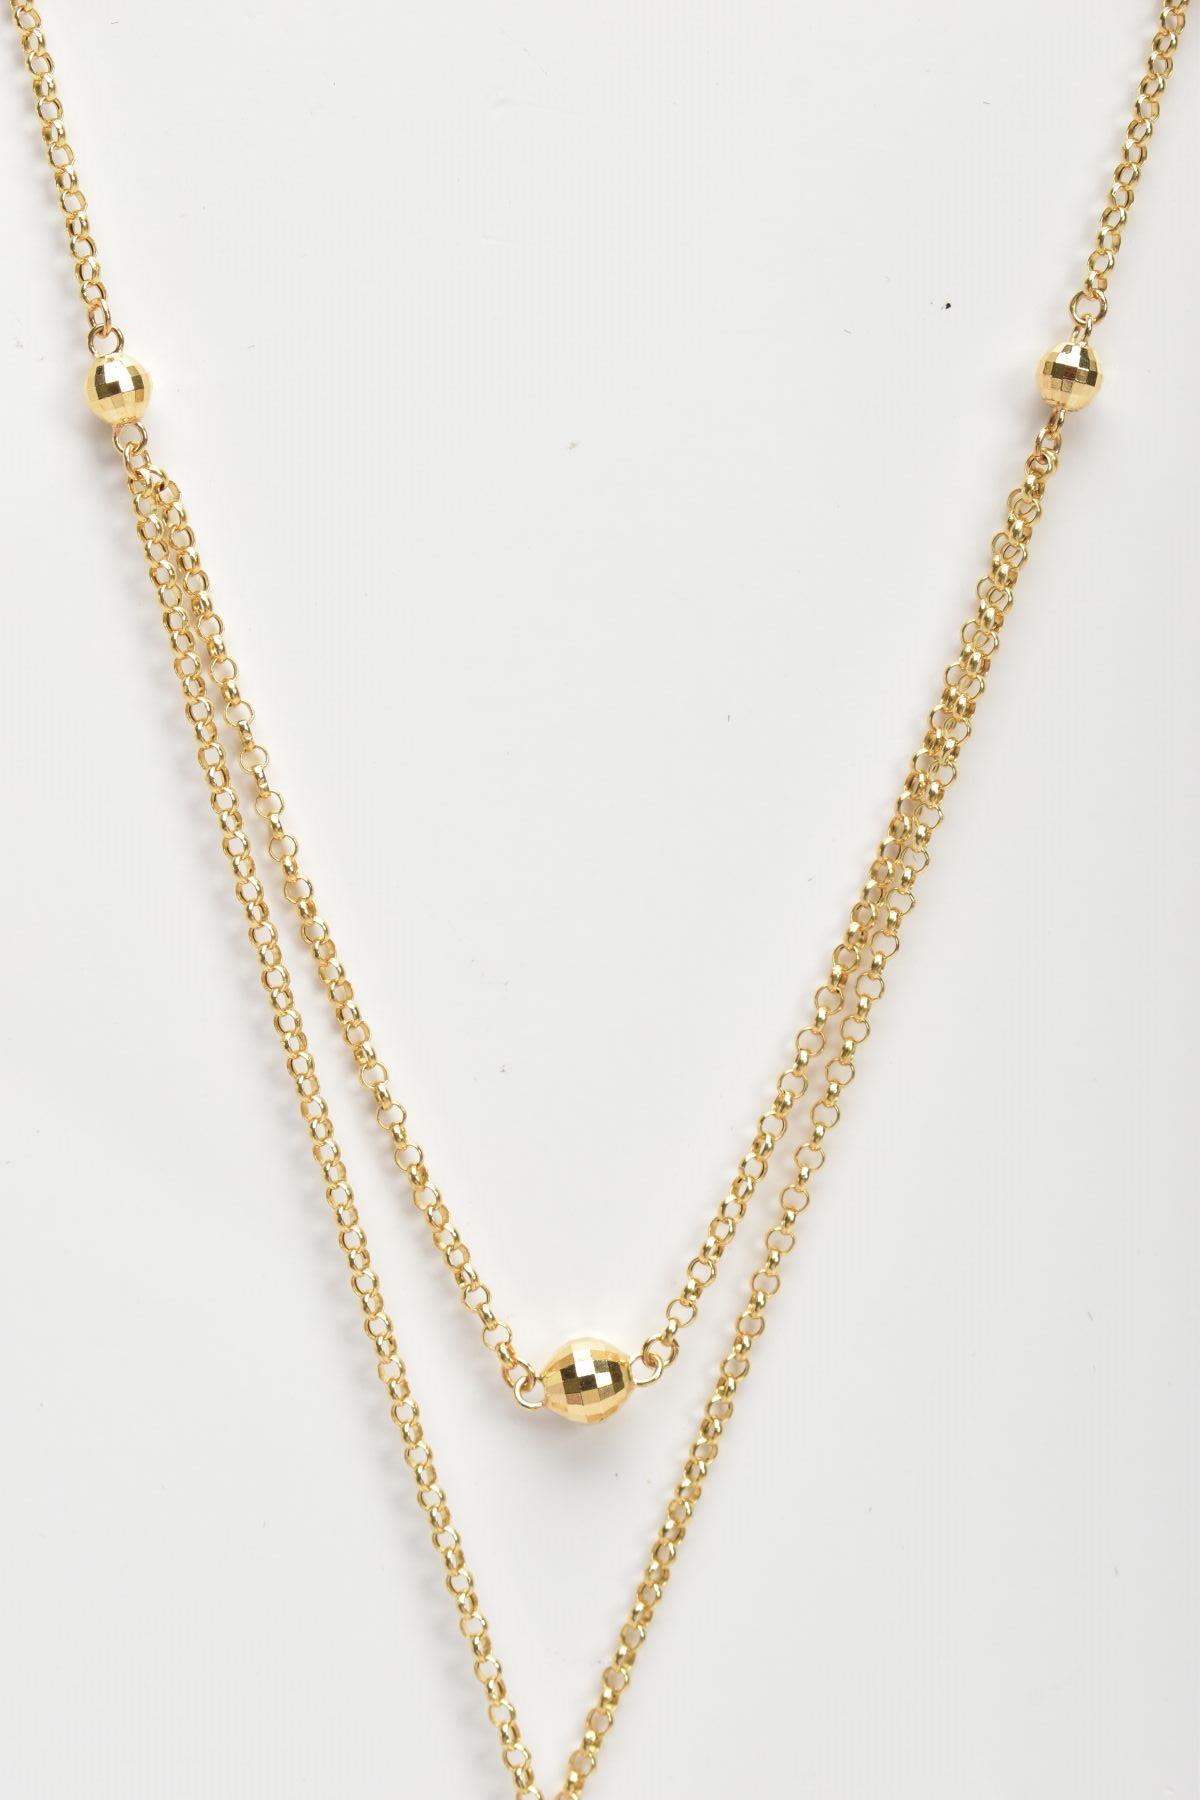 AN 18CT GOLD CHAIN NECKLACE, a fine trace chain, fitted with an additional part chain to appear as a - Bild 6 aus 6